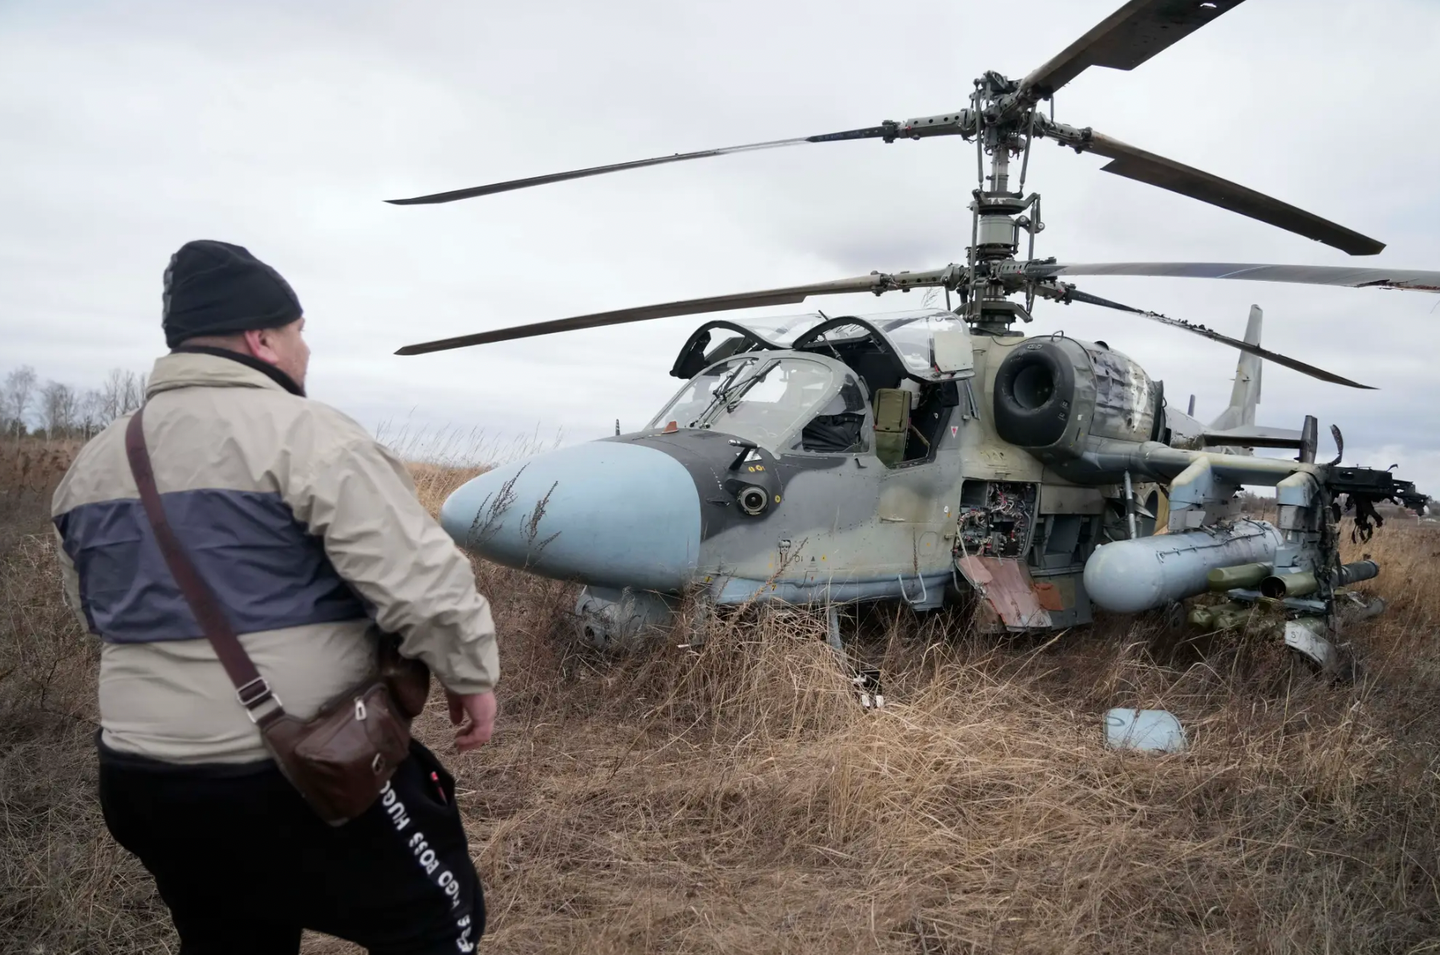 A man stands in front of a Russian Ka-52 forced to land in a field outside Kyiv, Ukraine, on February 24, 2022, on the first day of the full-scale invasion.&nbsp;<em>AP Photo/Efrem Lukatsky</em>